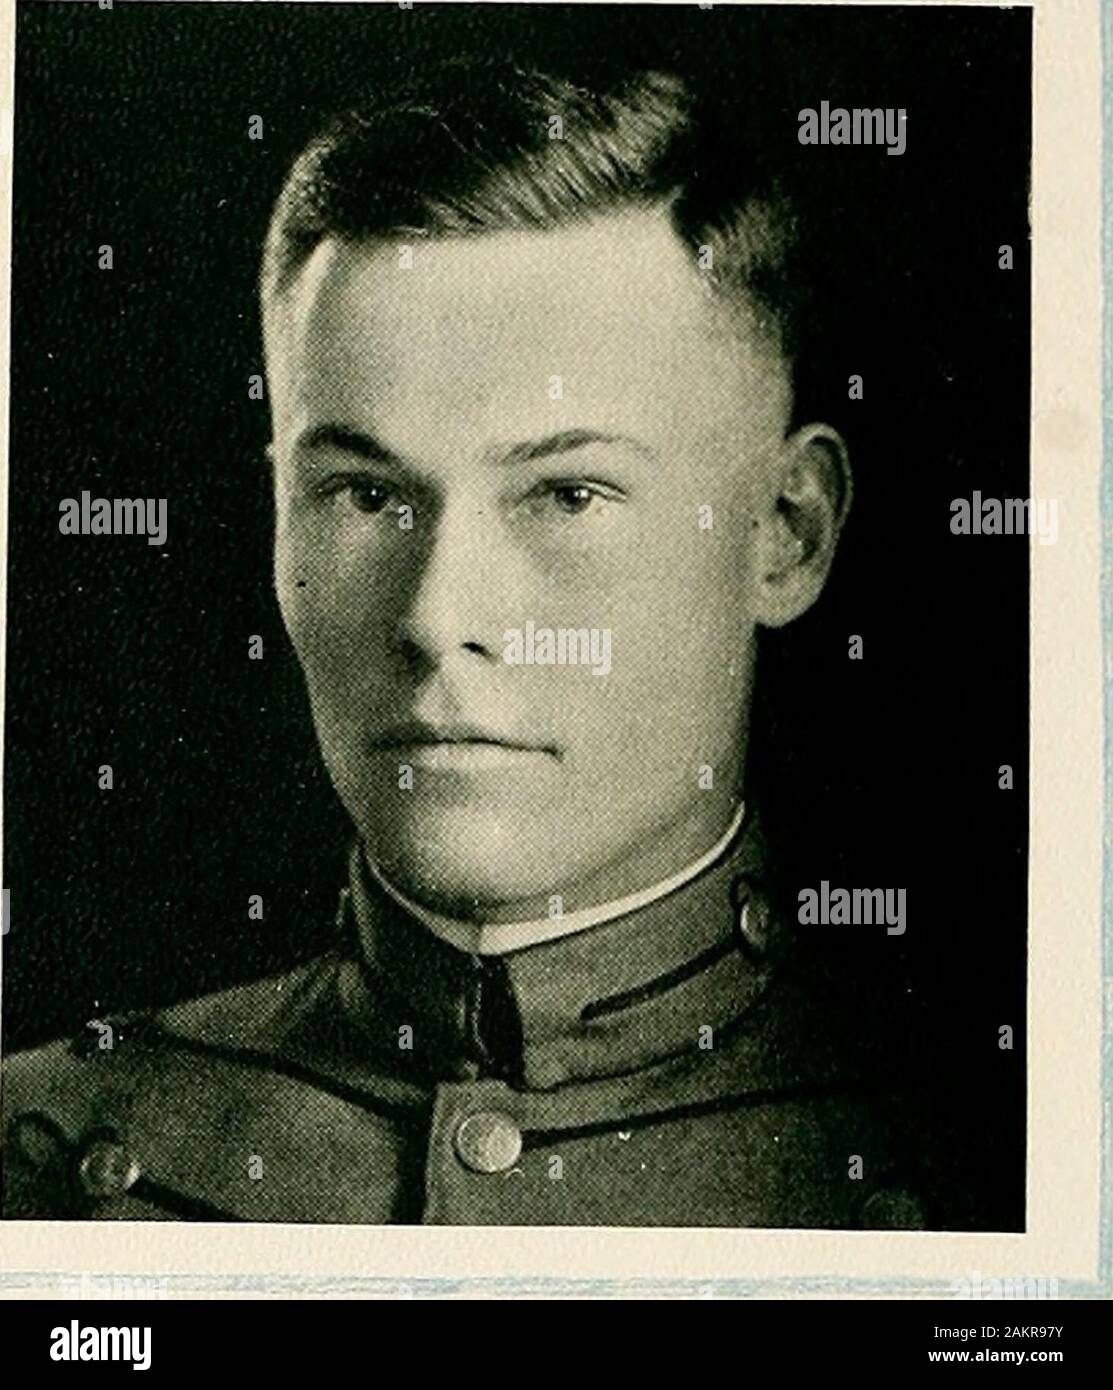 Bomb . Nathaniel Willis Pendleton, B.S. WYTHEVILLE, VIRGINIA Born 1898. Matriculated 1917.Infantry Nale, Polar Fourth Class: Private Co. A; Company Rifle Team; S. V. A. Club; SouthwestVirginia Club; Wrestling Team. Third Class: Corporal Co. A; Company RifleTeam; S. V. A. Club; Southwest Virginia Club; Track Squad. Second ClassColor Sergeant; Co. A Rifle Team; S. V. A. Club; Southwest Virginia ClubTrack Team; Football Squad; Marshal Final Ball. First Class: Private Co. ACompany Rifle Team; S. V. A. Club; Southwest Virginia Club; Track Team?Wrestling Team; Football Squad; Marshal Final German. ? Stock Photo